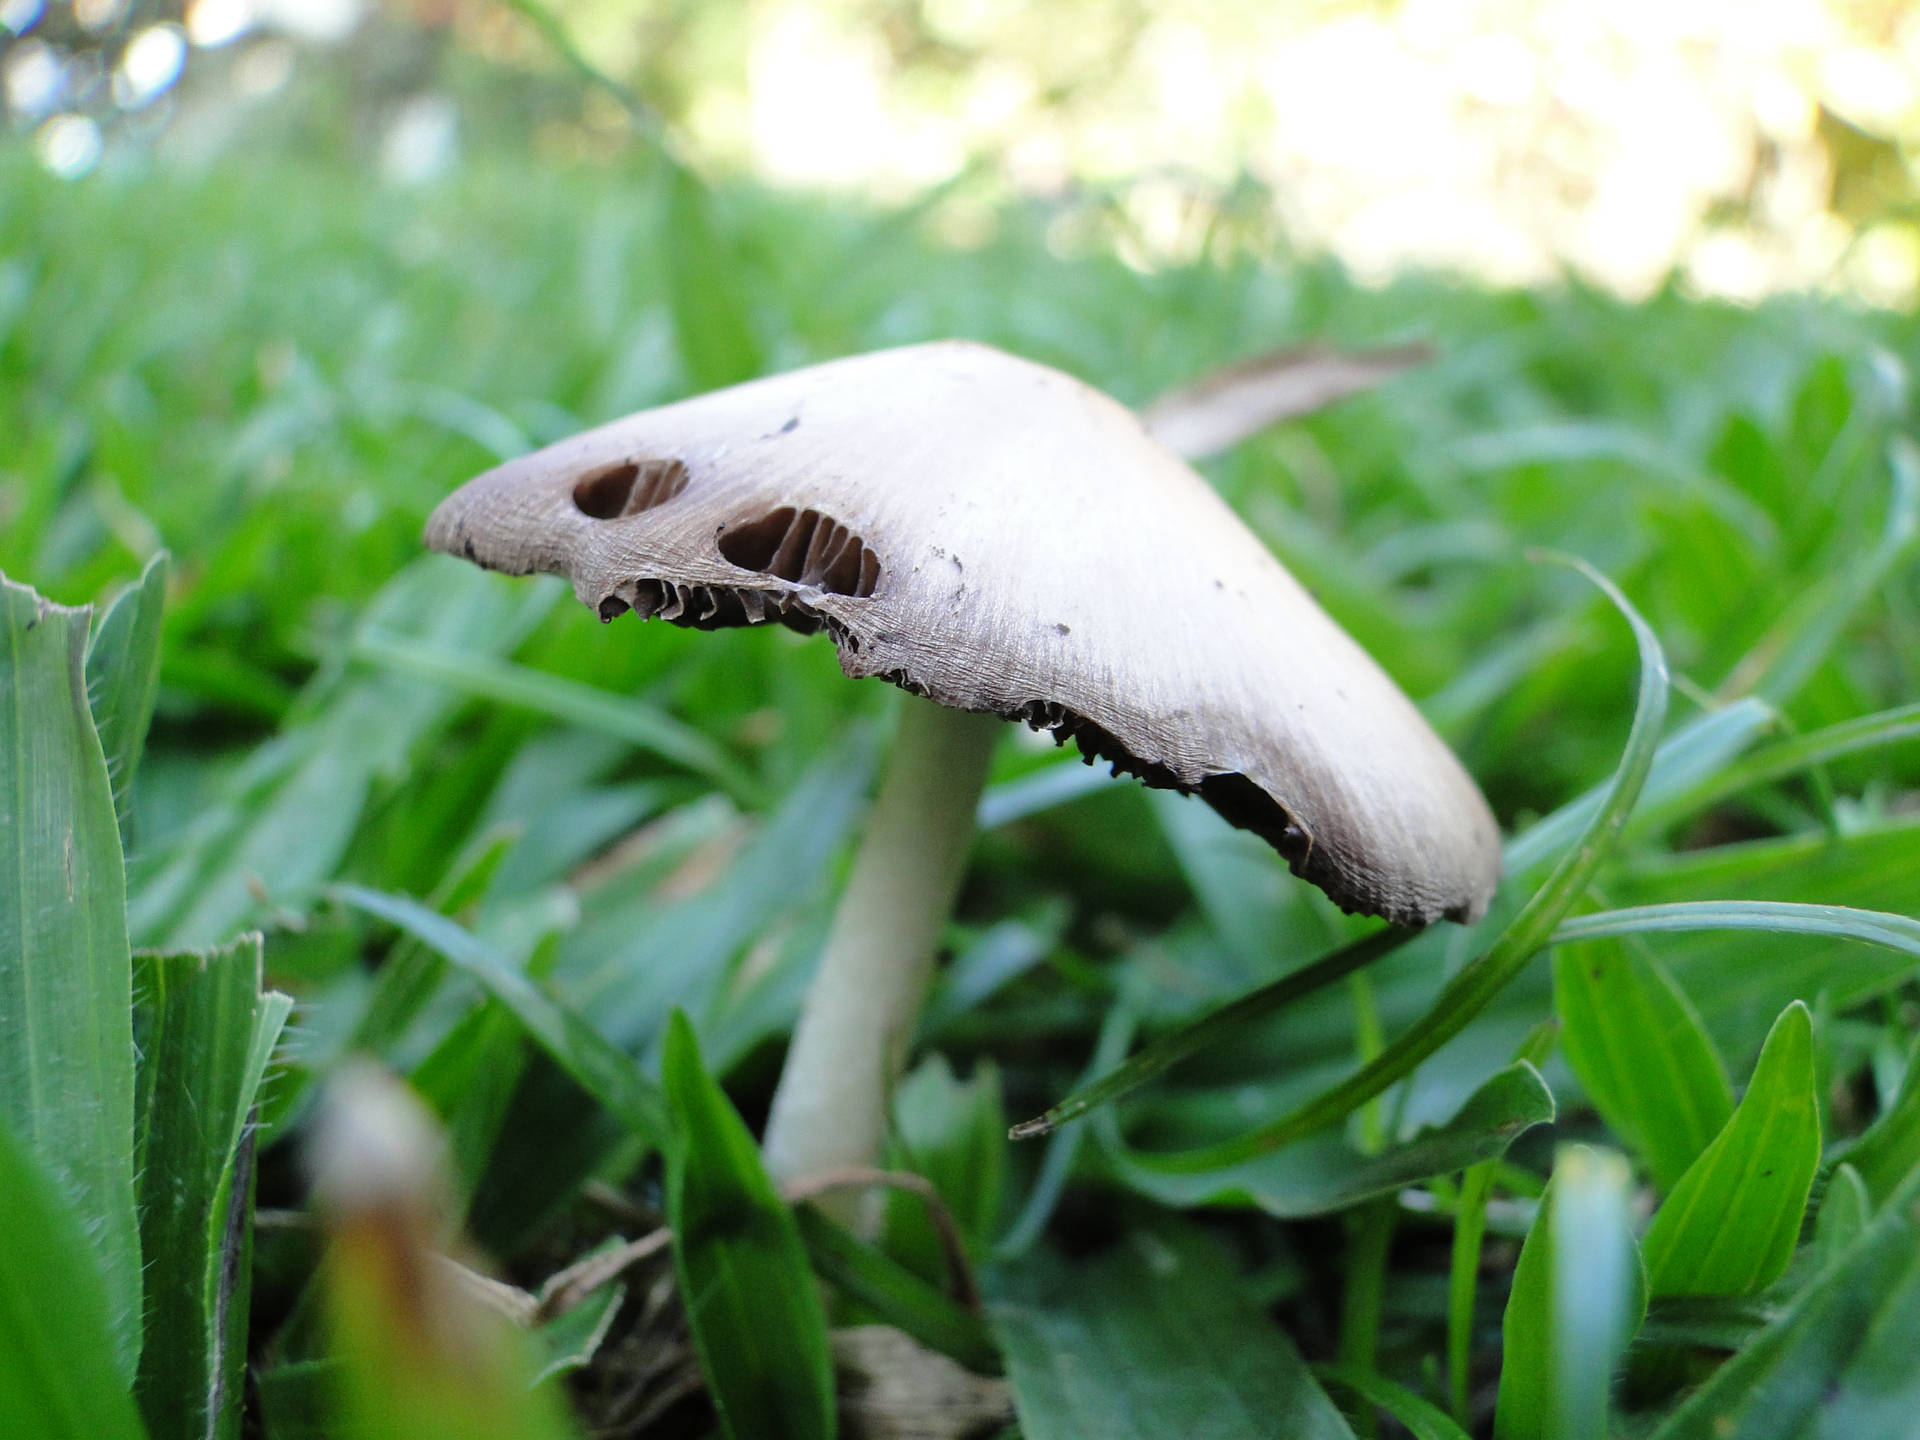 Cute White Mushroom With Tilted Cap Among Plants Background